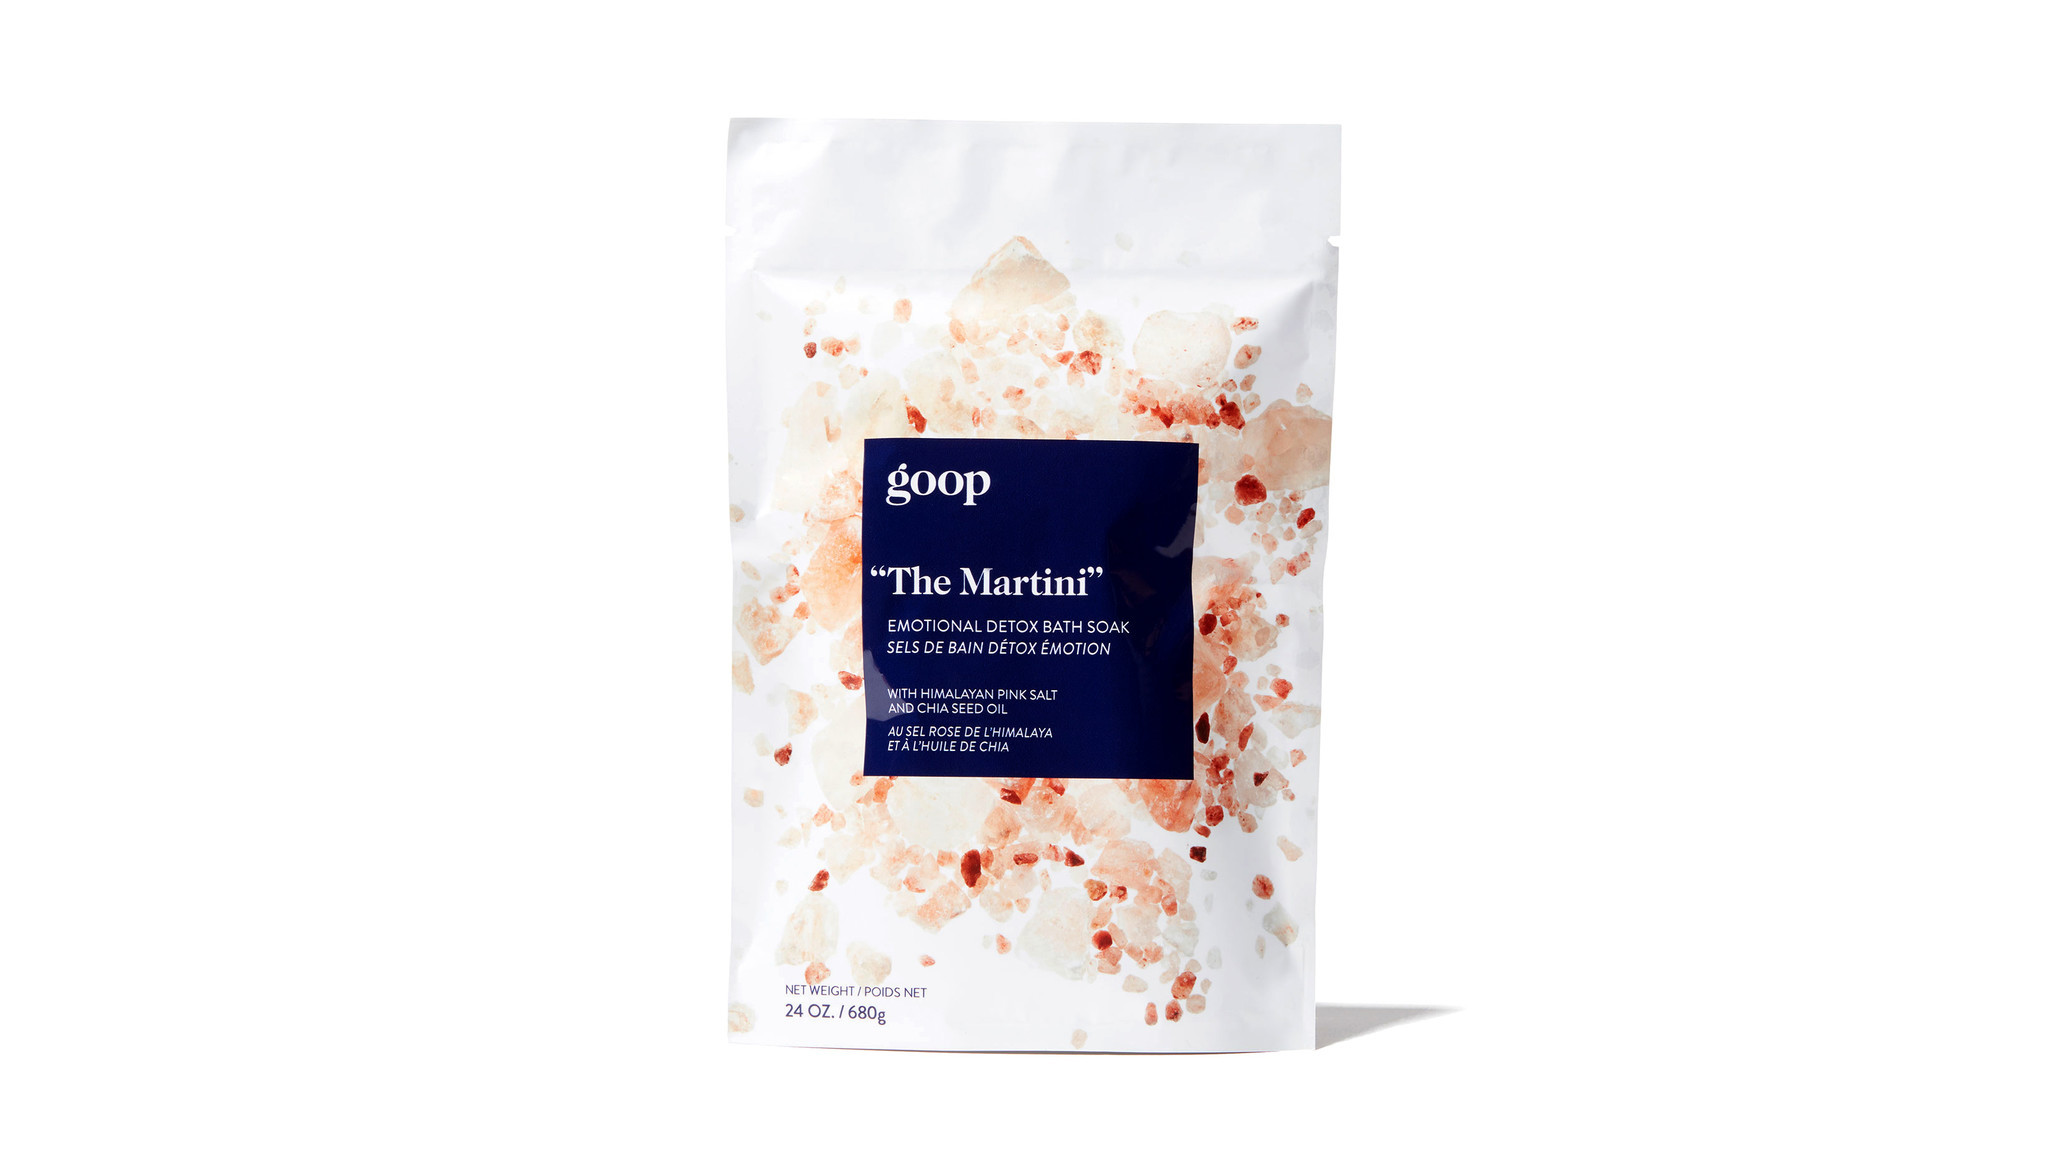 Goop The Martini detox bath soak with Himalayan pink salt and chia seed oil, $35 at Goop Lab in Bren